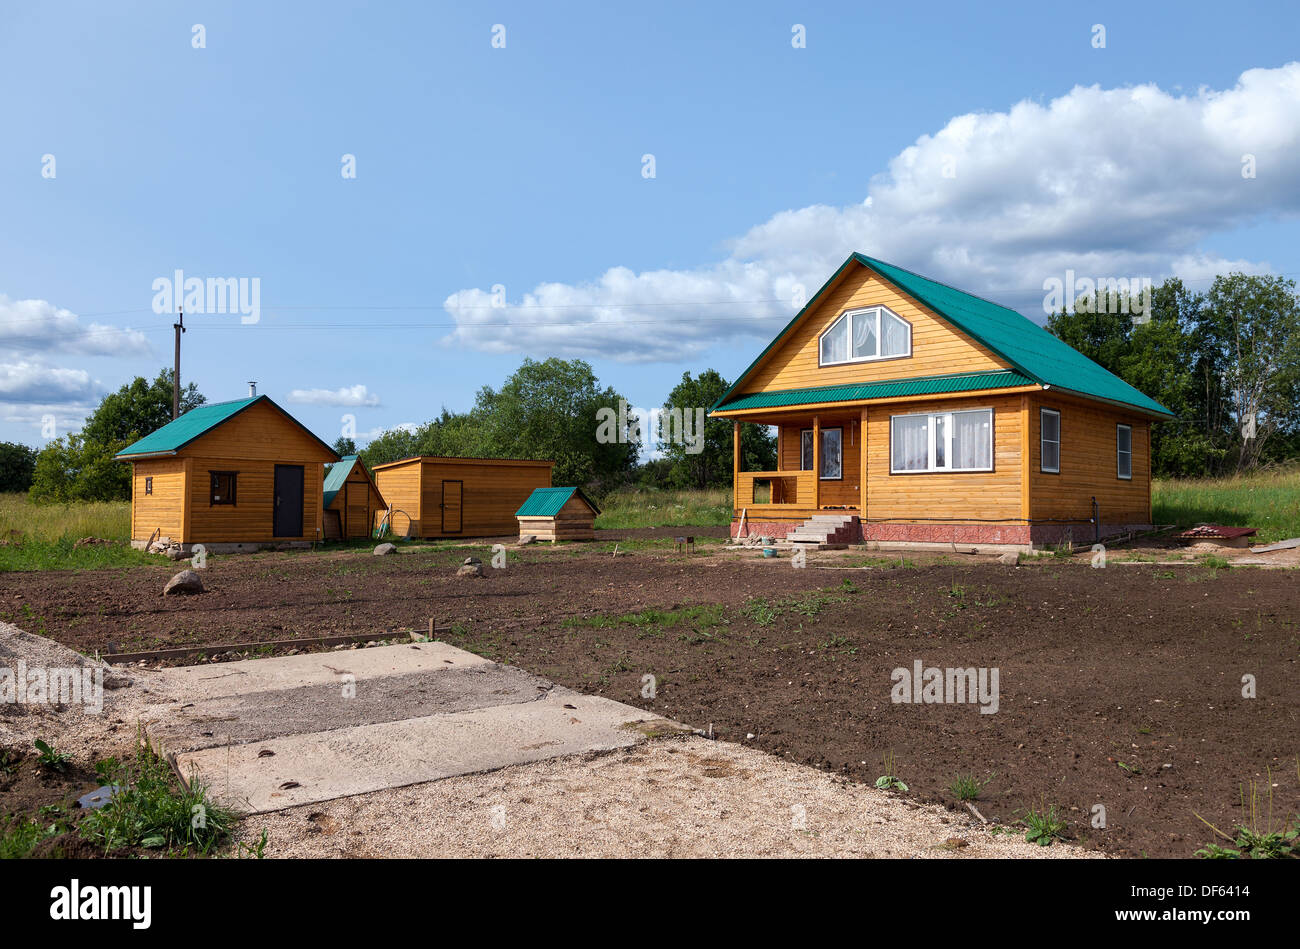 New wooden house at the village in summertime Stock Photo